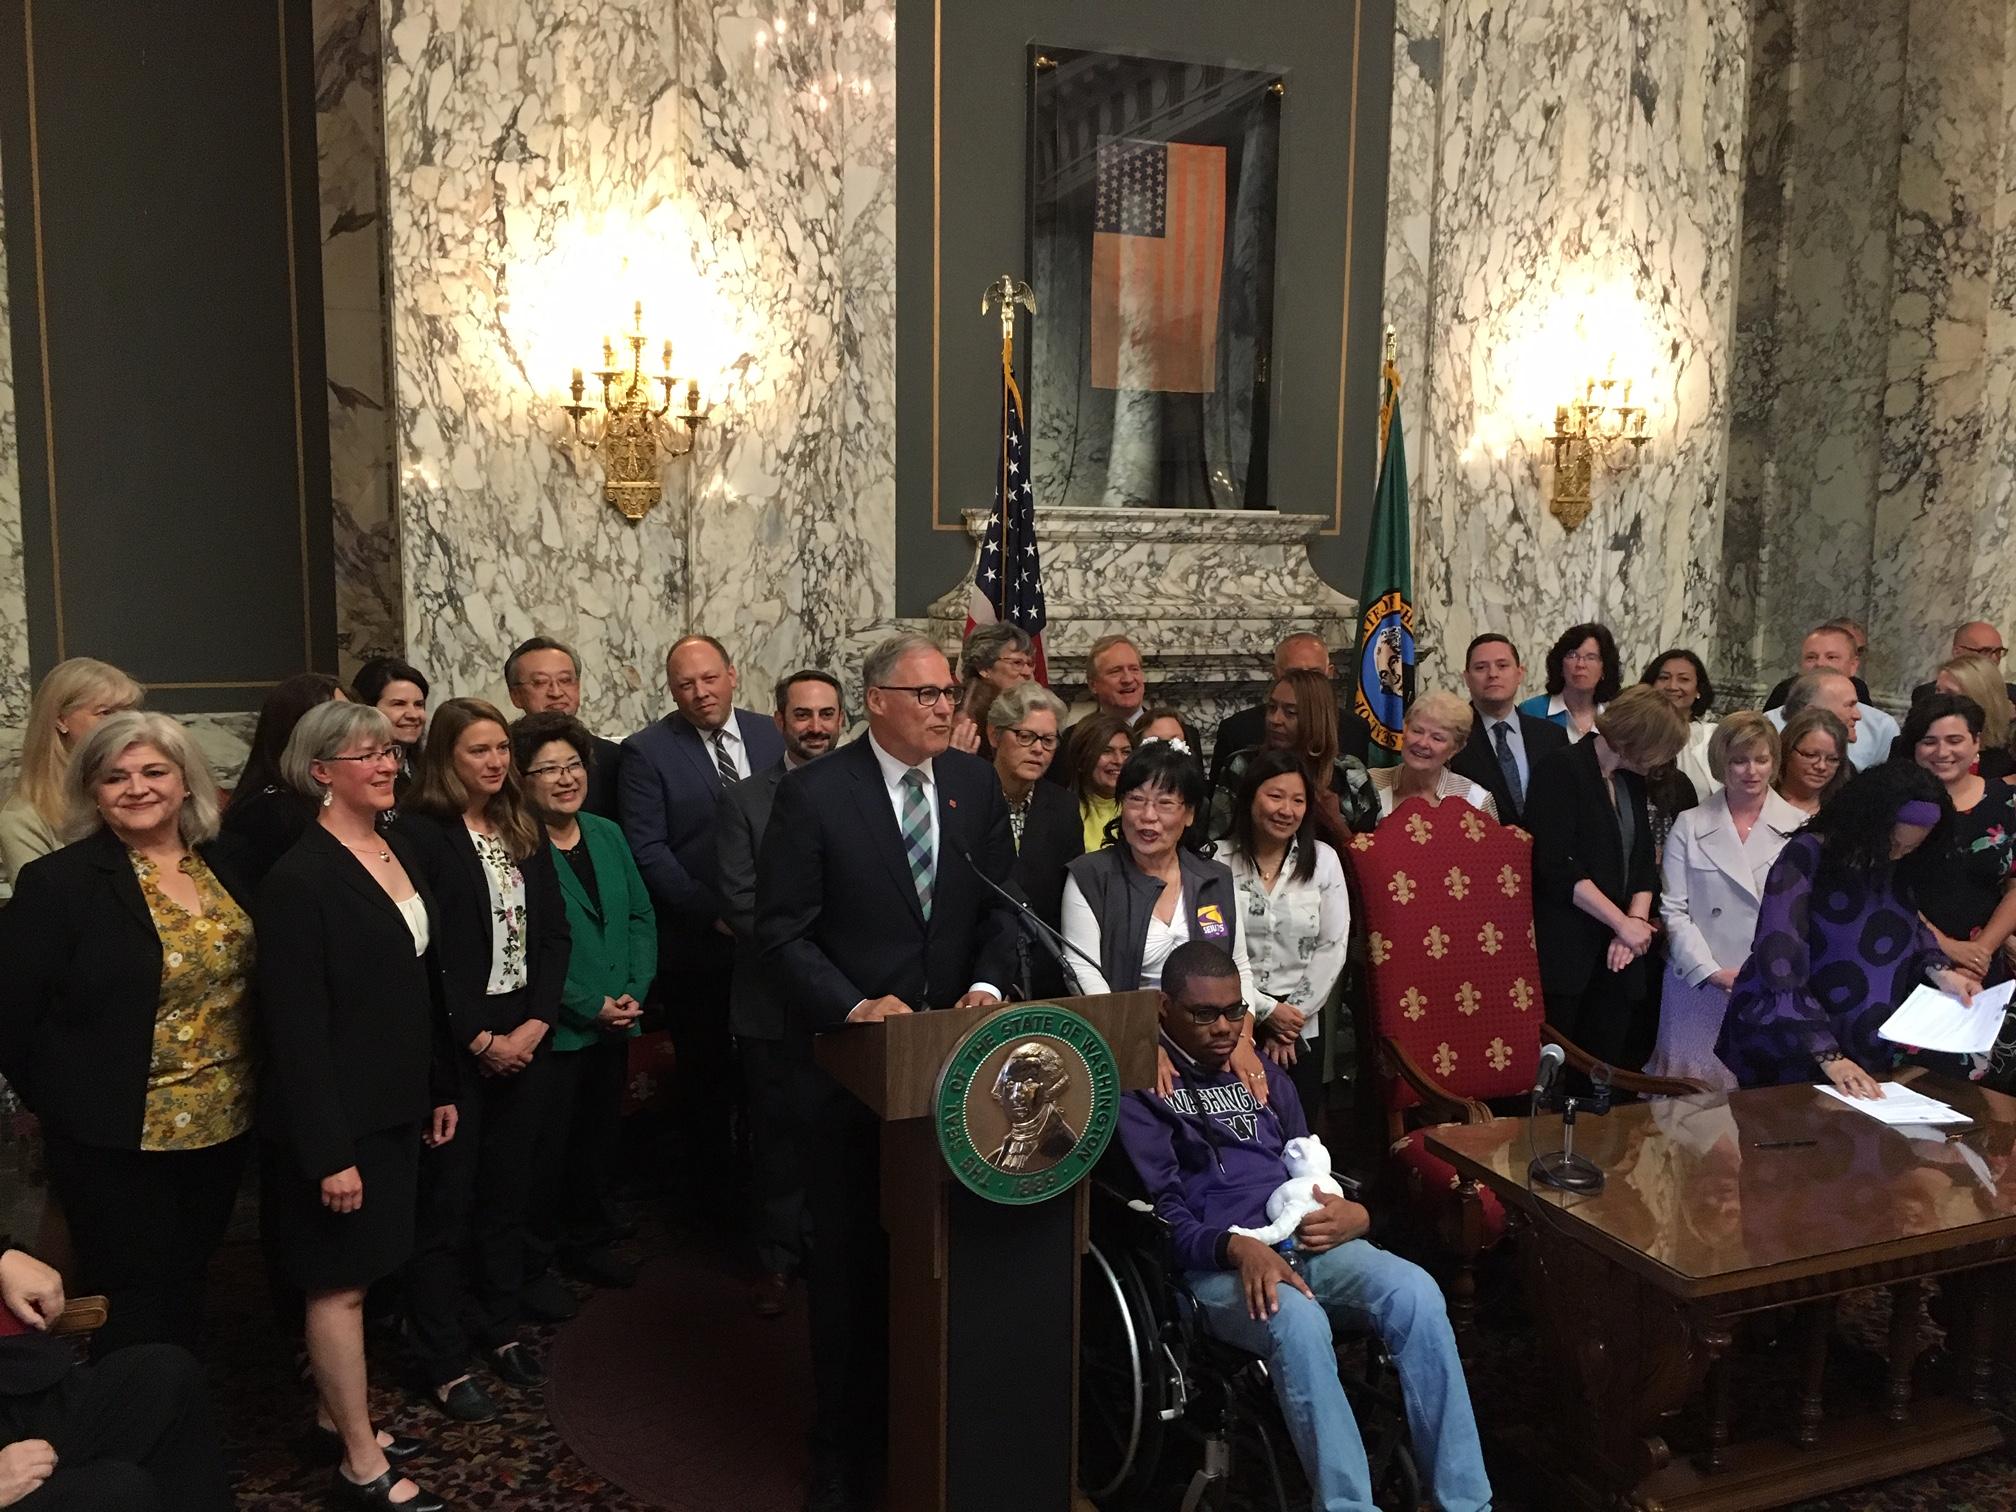 Washington Gov. Jay Inslee signed two historic bills into law on Monday. One creates a public health insurance option, the other a new long-term care benefit. CREDIT: AUSTIN JENKINS / NORTHWEST NEWS NETWORK